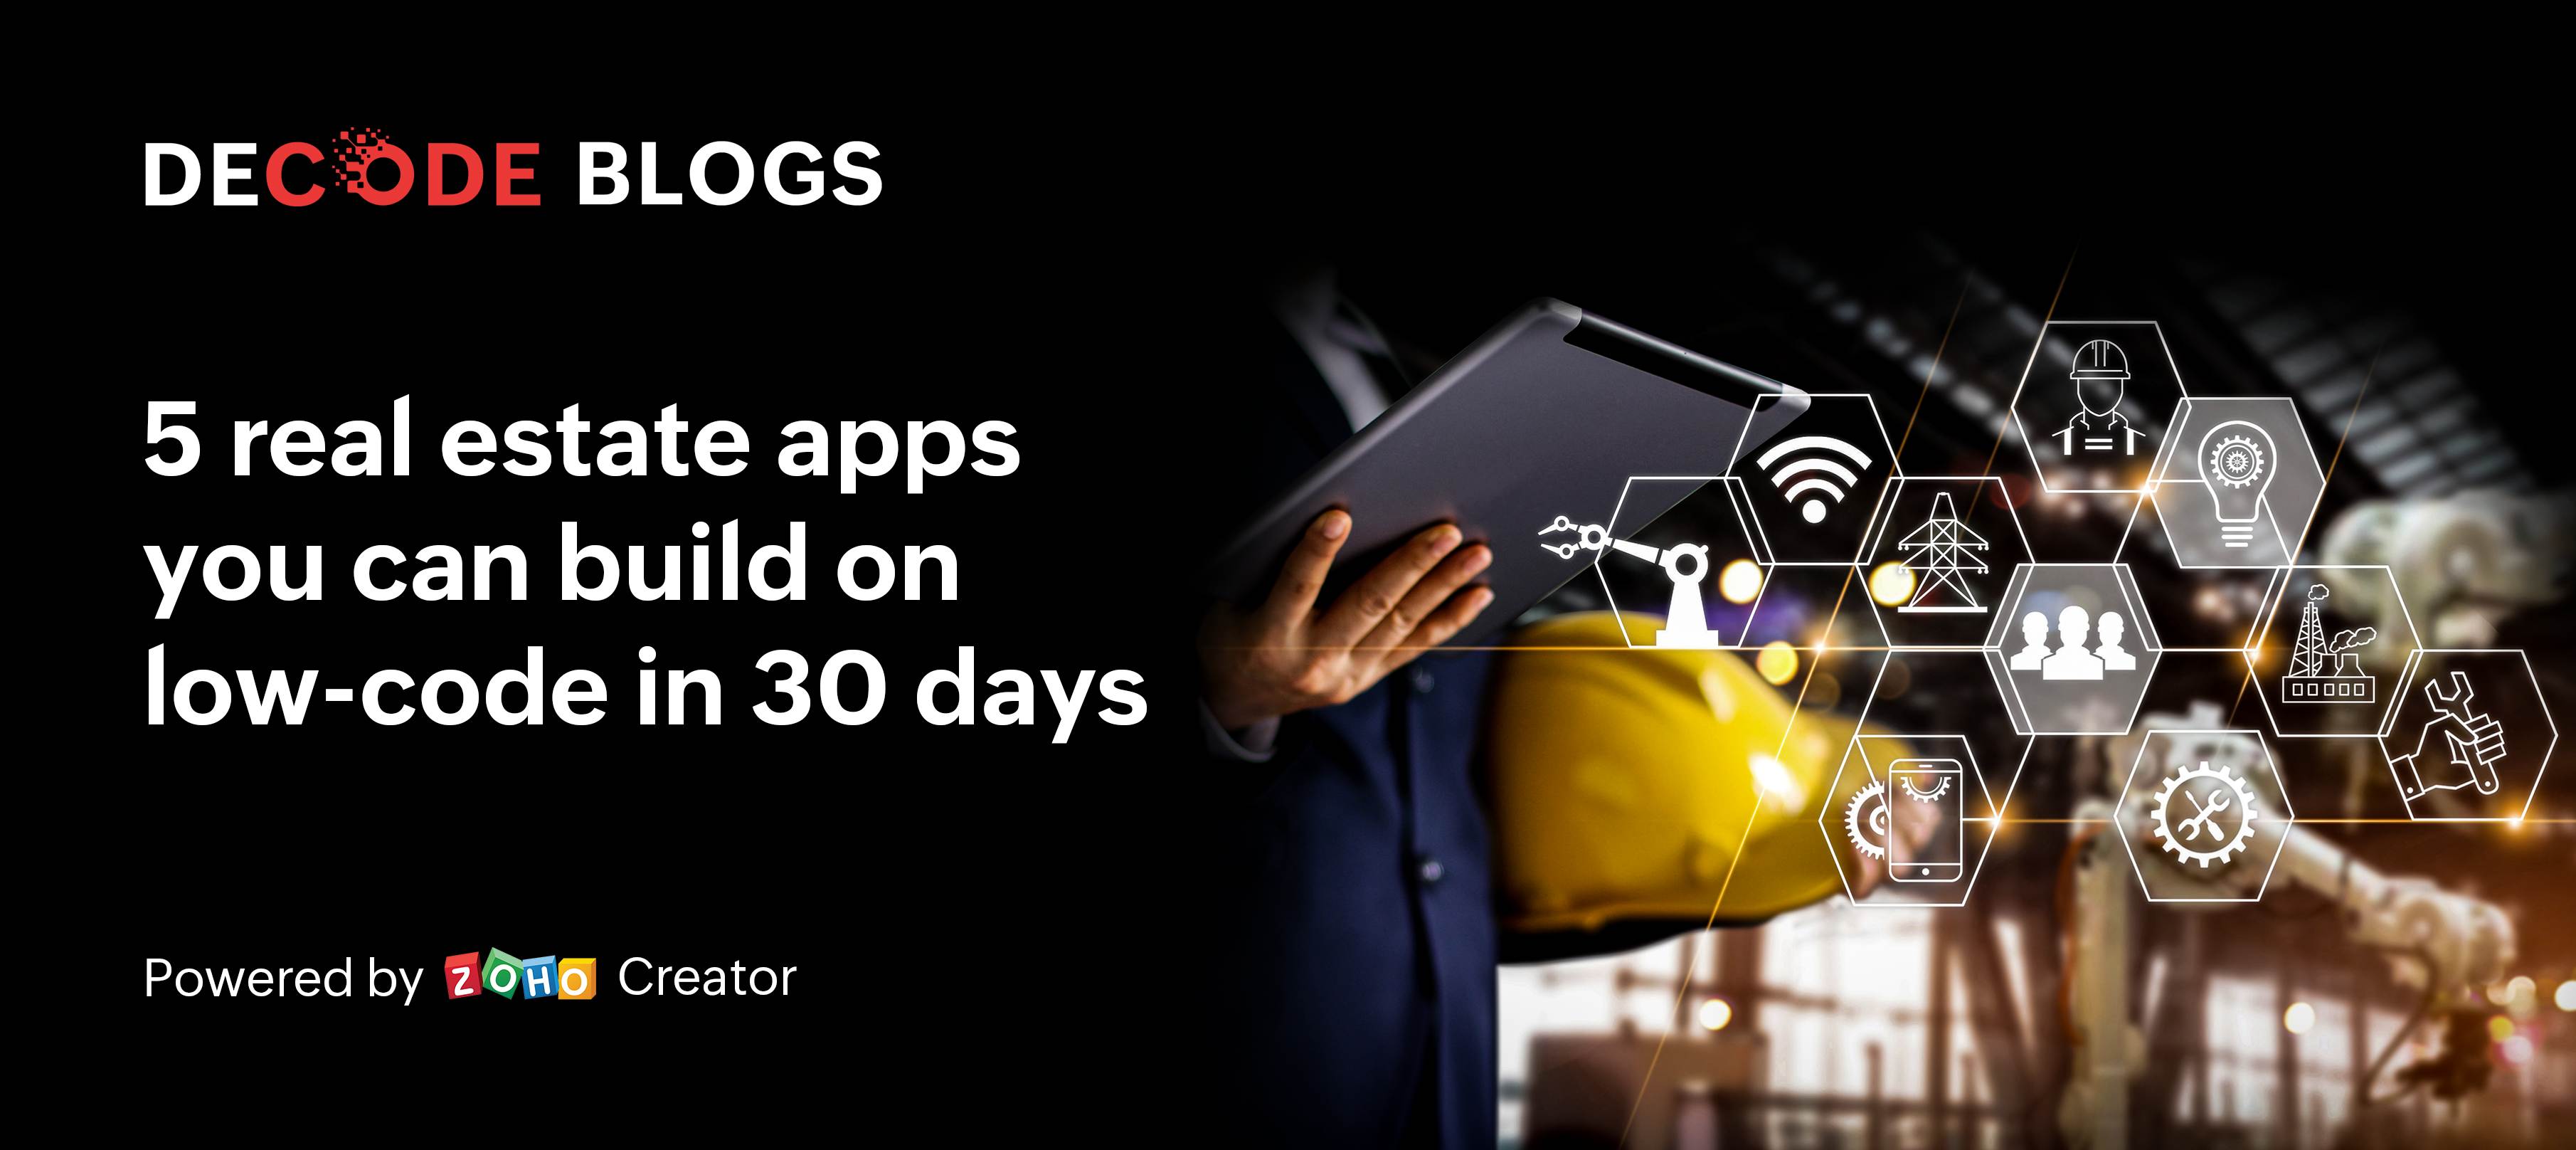 5 real estate apps you can build on low-code in 30 days